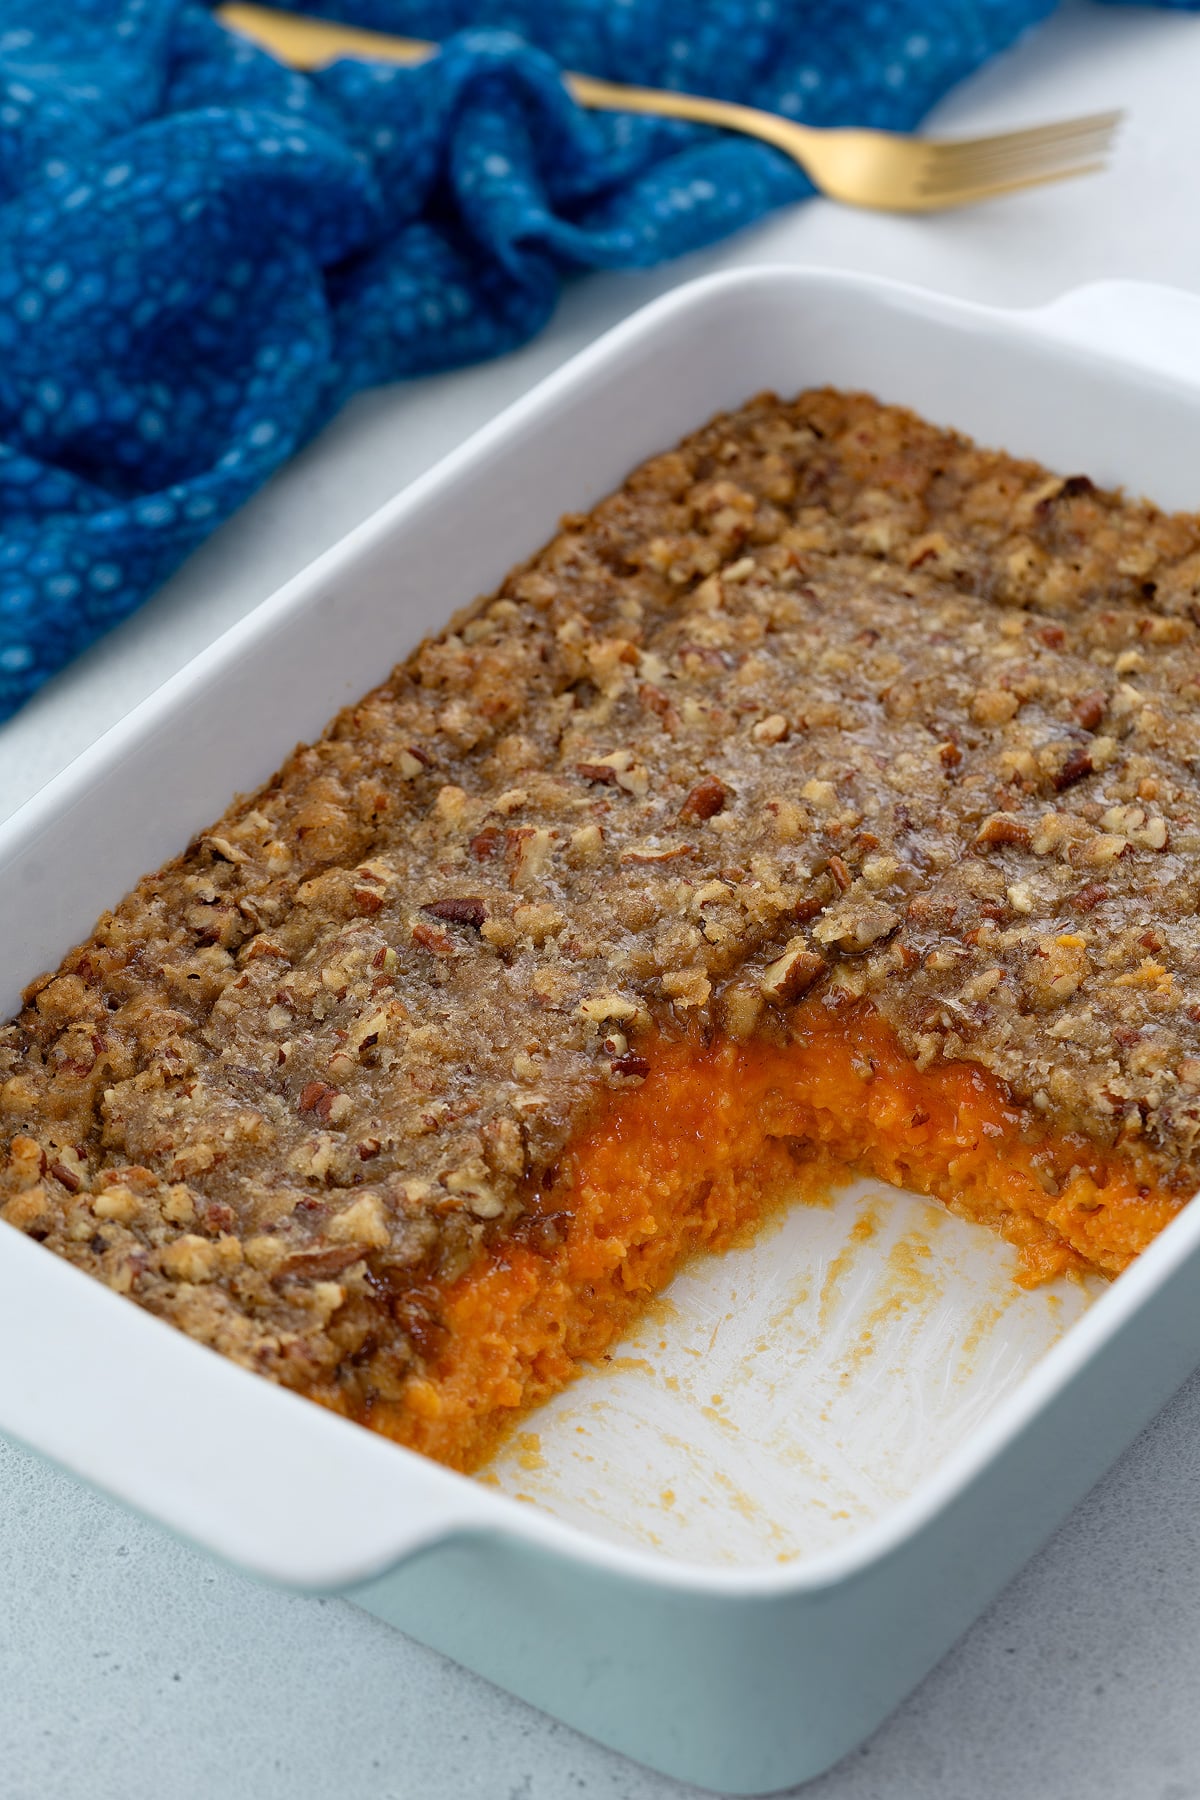 Sweet potato casserole in a white baking dish on a table, with a slice taken out, accompanied by a blue towel and a golden fork.